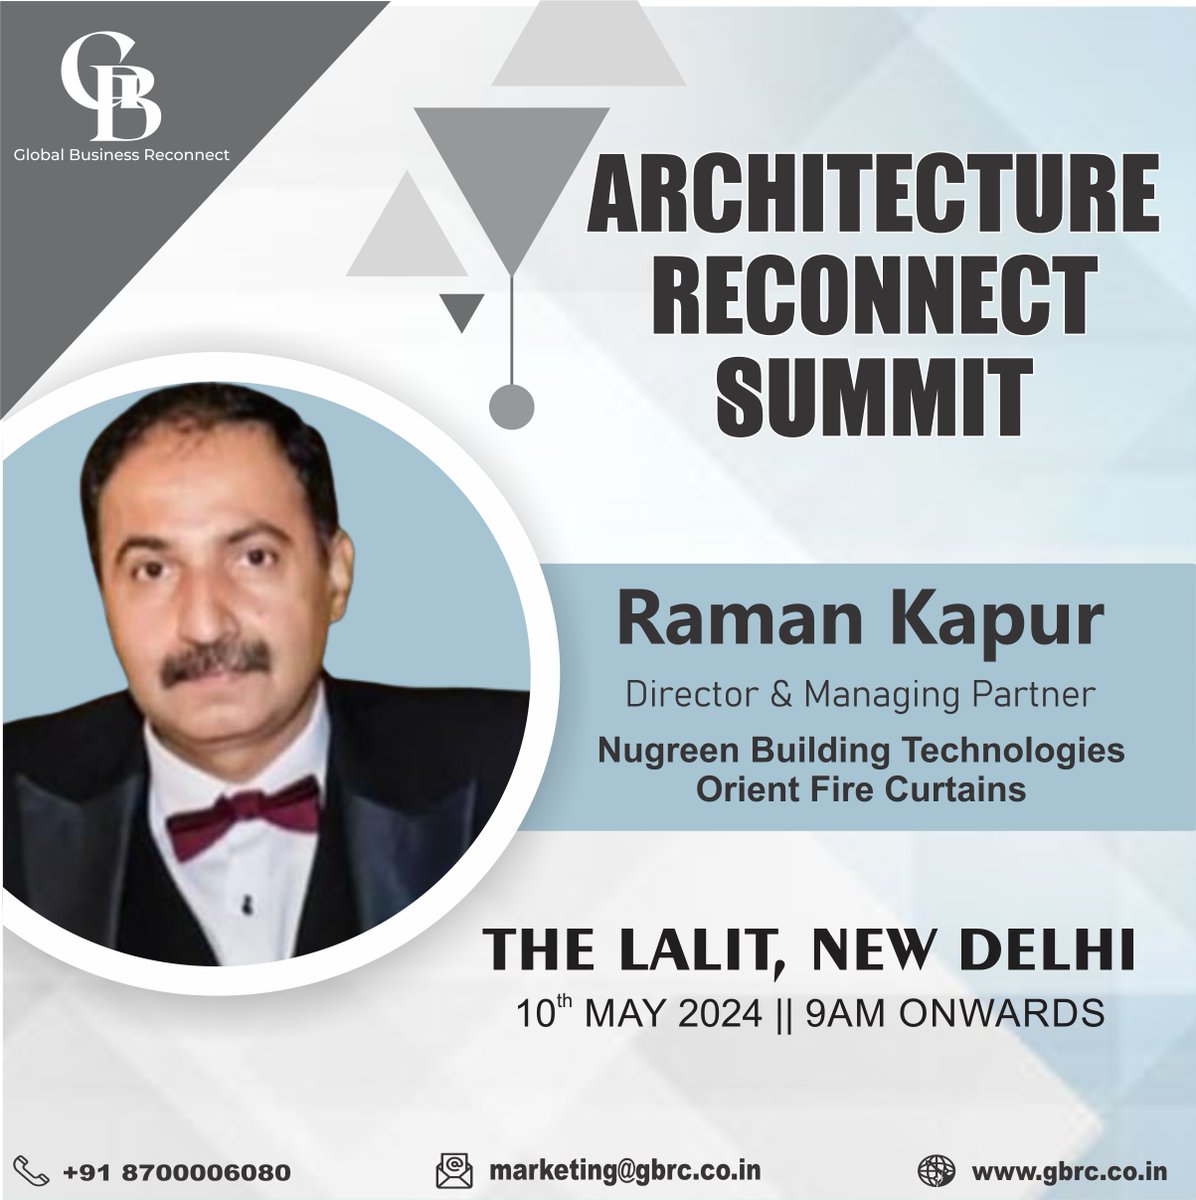 Join us to welcome Mr. Raman Kapur, Director & Managing Partner from Nugreen Building Technologies Orient Fire Curtains will be the industry presenter at our upcoming Architecture Reconnect Summit on May 10th ,2024 at The Lalit ,New Delhi.

#architecturereconnectsummit #GBRC